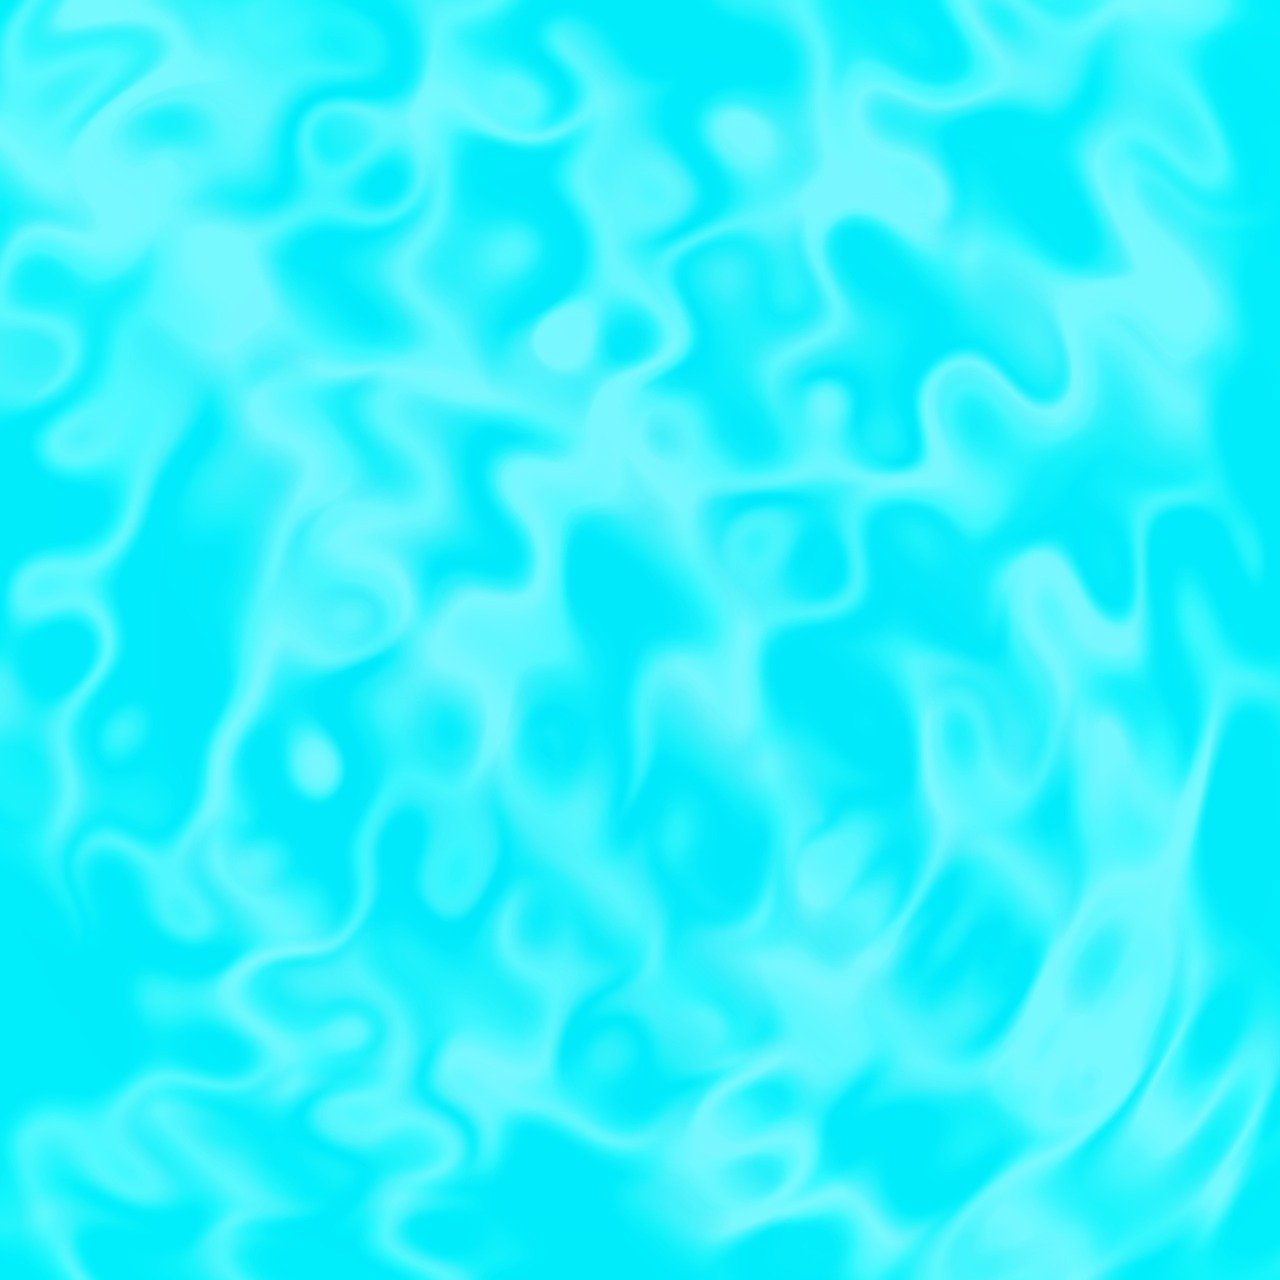 a close up of a blurry blue background, tumblr, digital art, realistic water, air brush illustration